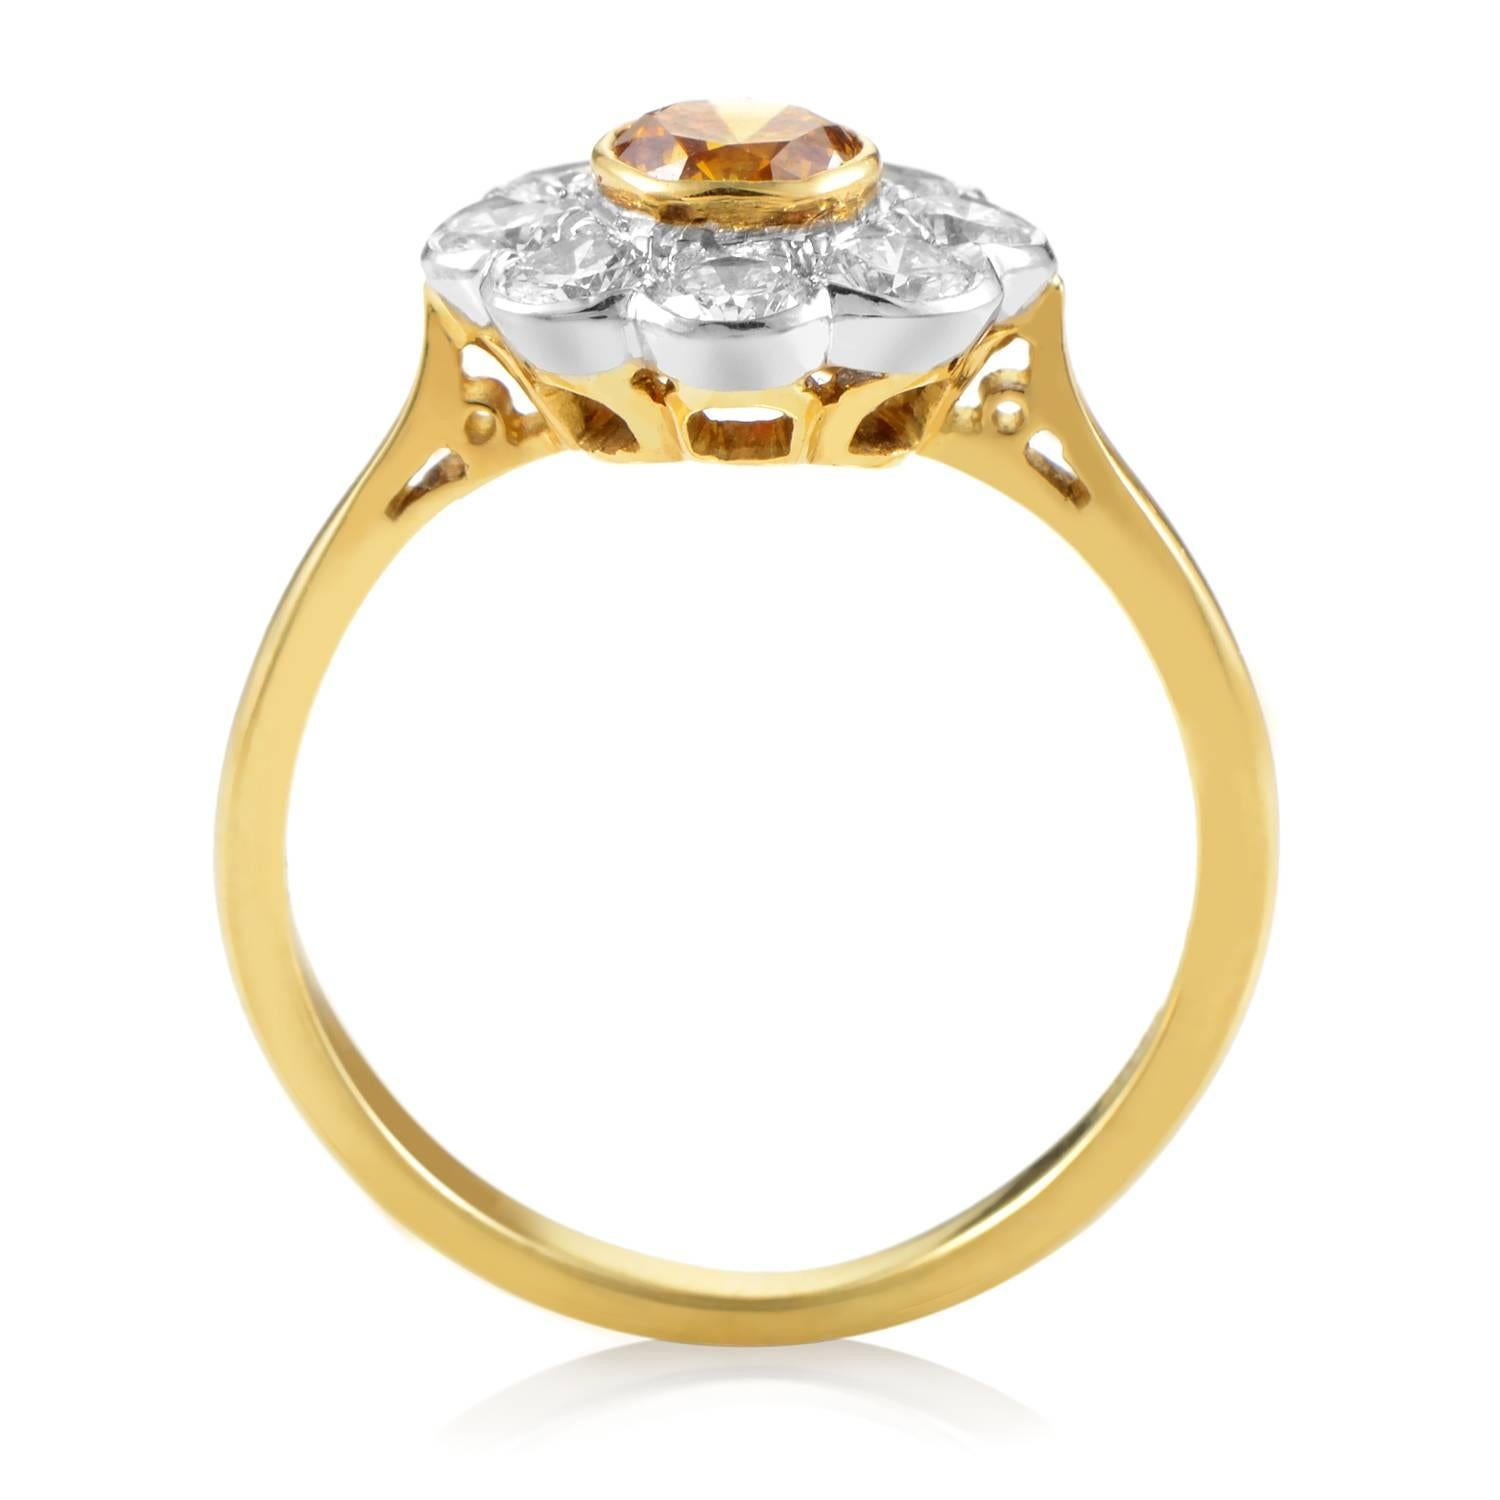 Creating a wonderful backdrop for the fascinating central orange diamond weighing approximately 0.35 ct, this delightful ring from Garrard boasts a neat body made of 18K yellow and white gold and embellished with 0.65 ct of sparkling white